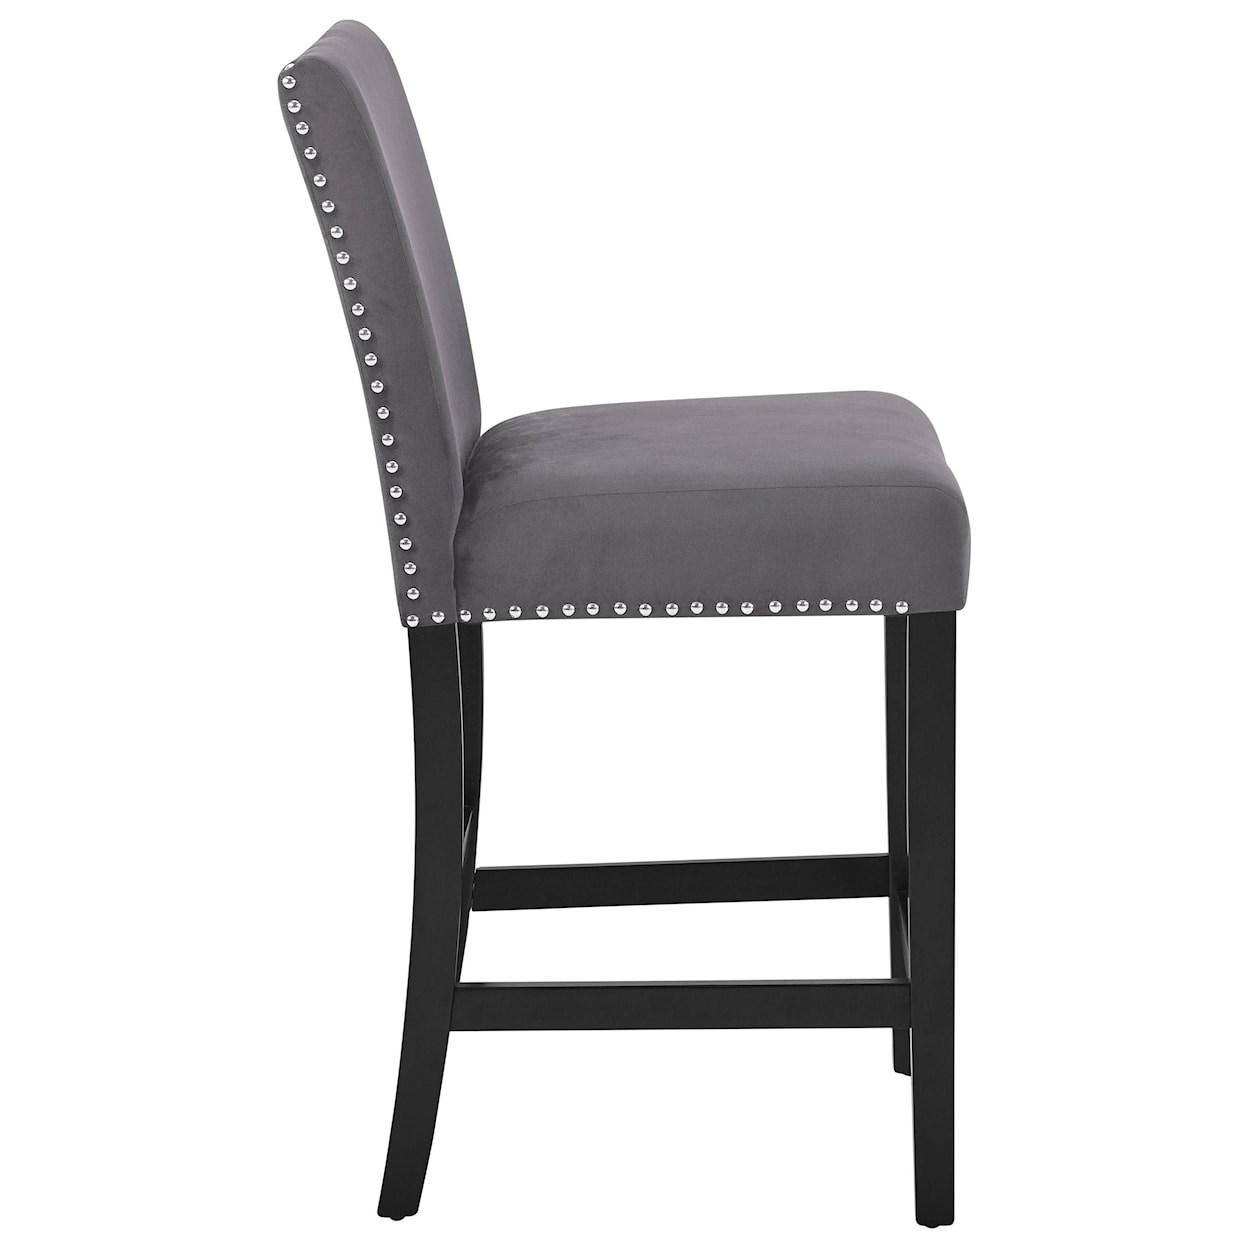 New Classic Celeste Counter Chair